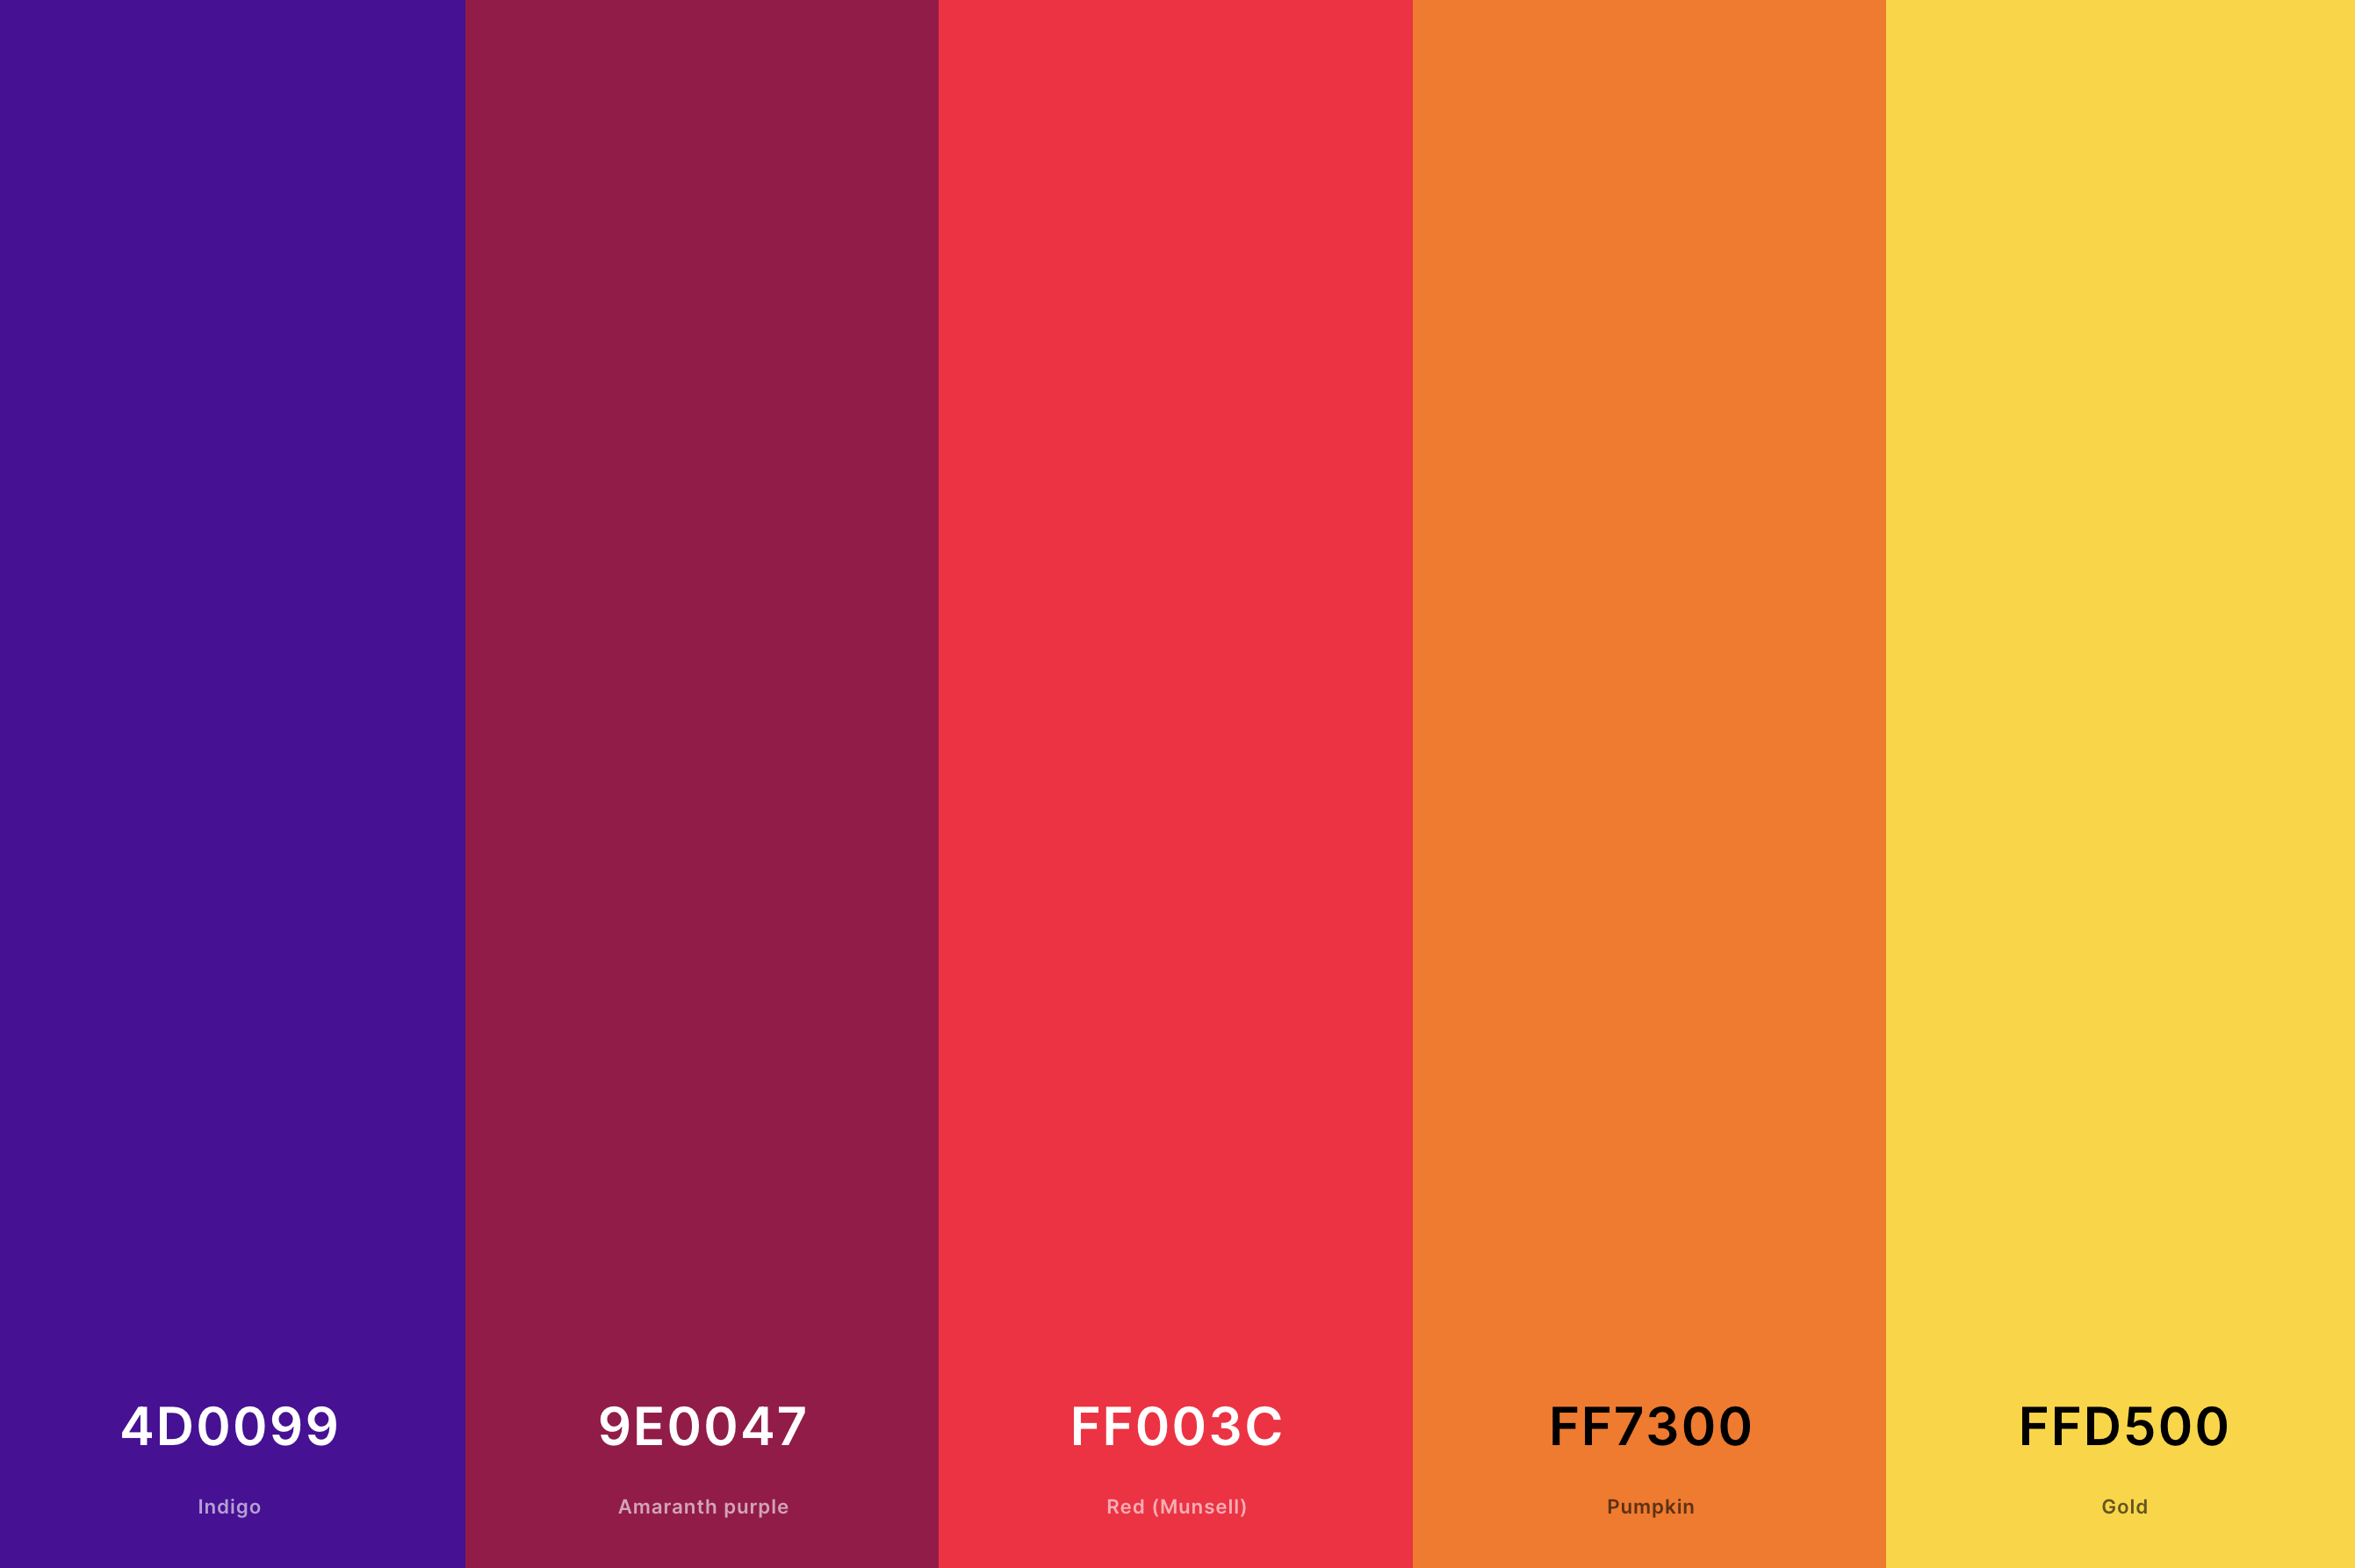 27. 80s Sunset Color Palette Color Palette with Indigo (Hex #4D0099) + Amaranth Purple (Hex #9E0047) + Red (Munsell) (Hex #FF003C) + Pumpkin (Hex #FF7300) + Gold (Hex #FFD500) Color Palette with Hex Codes